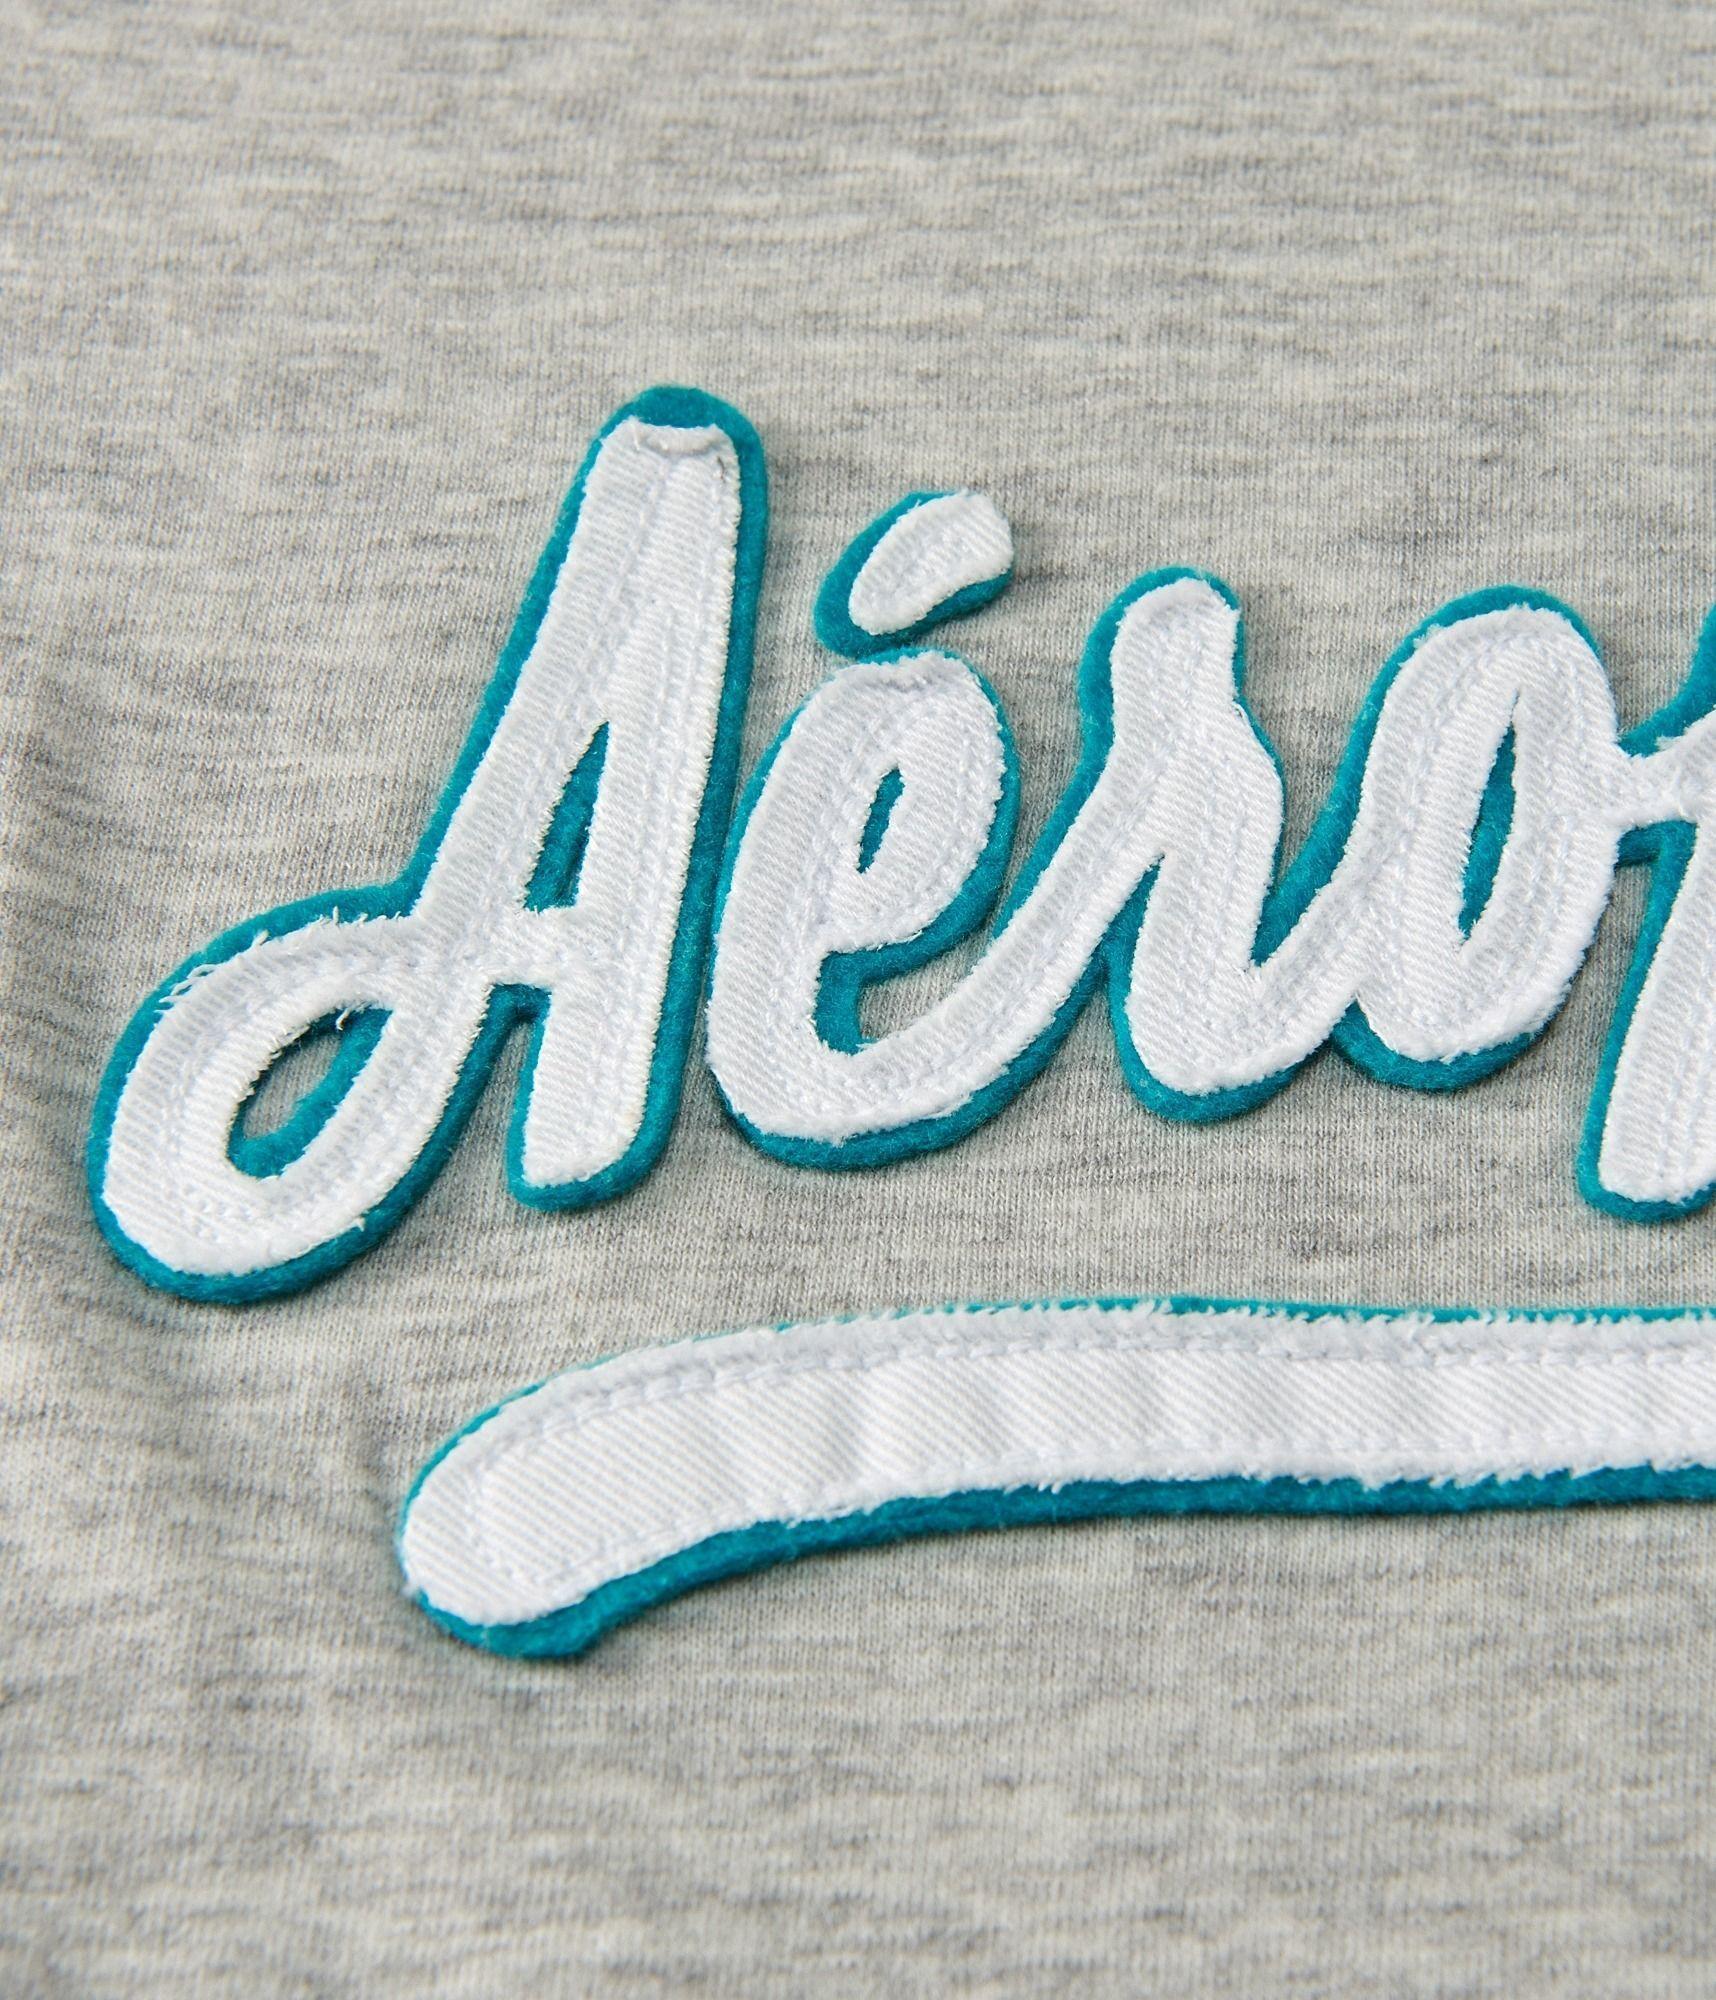 Areopostile Logo - Aéropostale Logo Graphic Tee